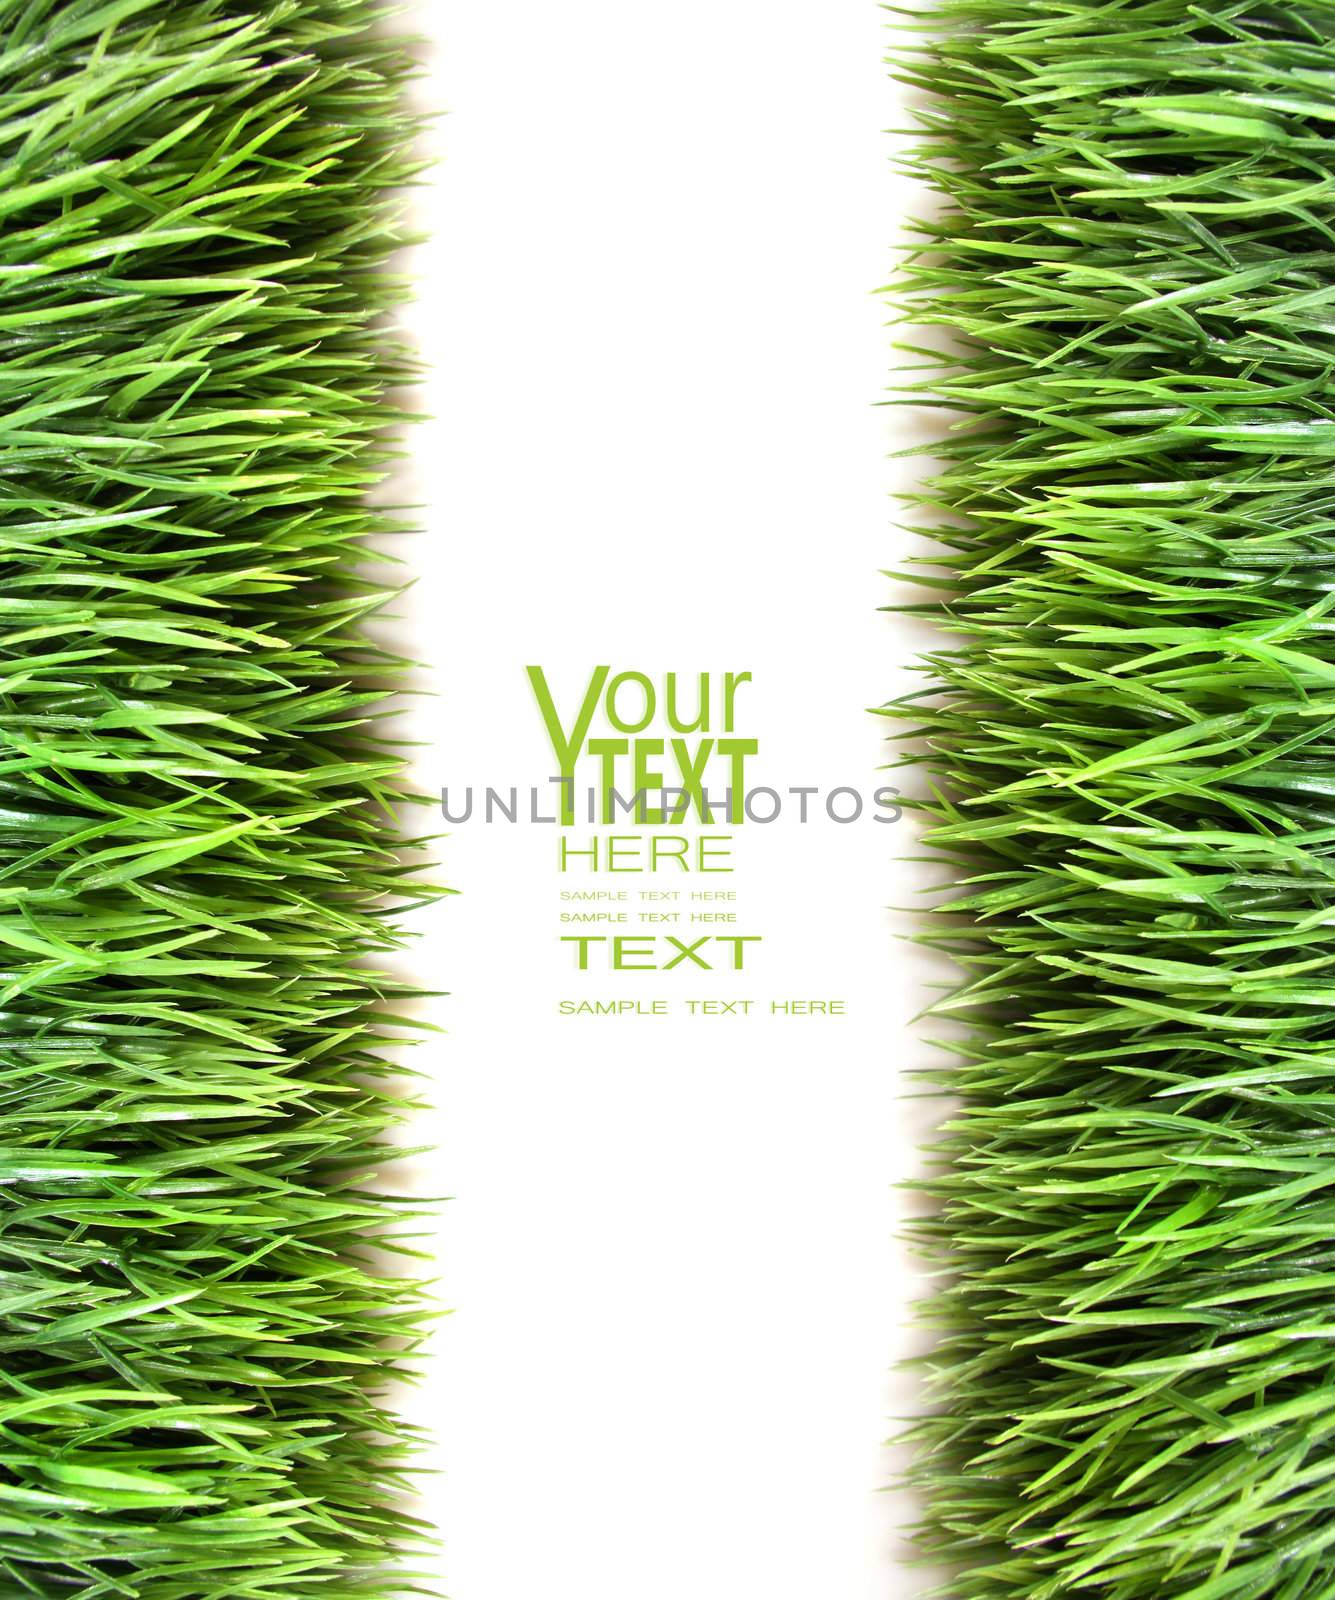 Overview of grass on white background